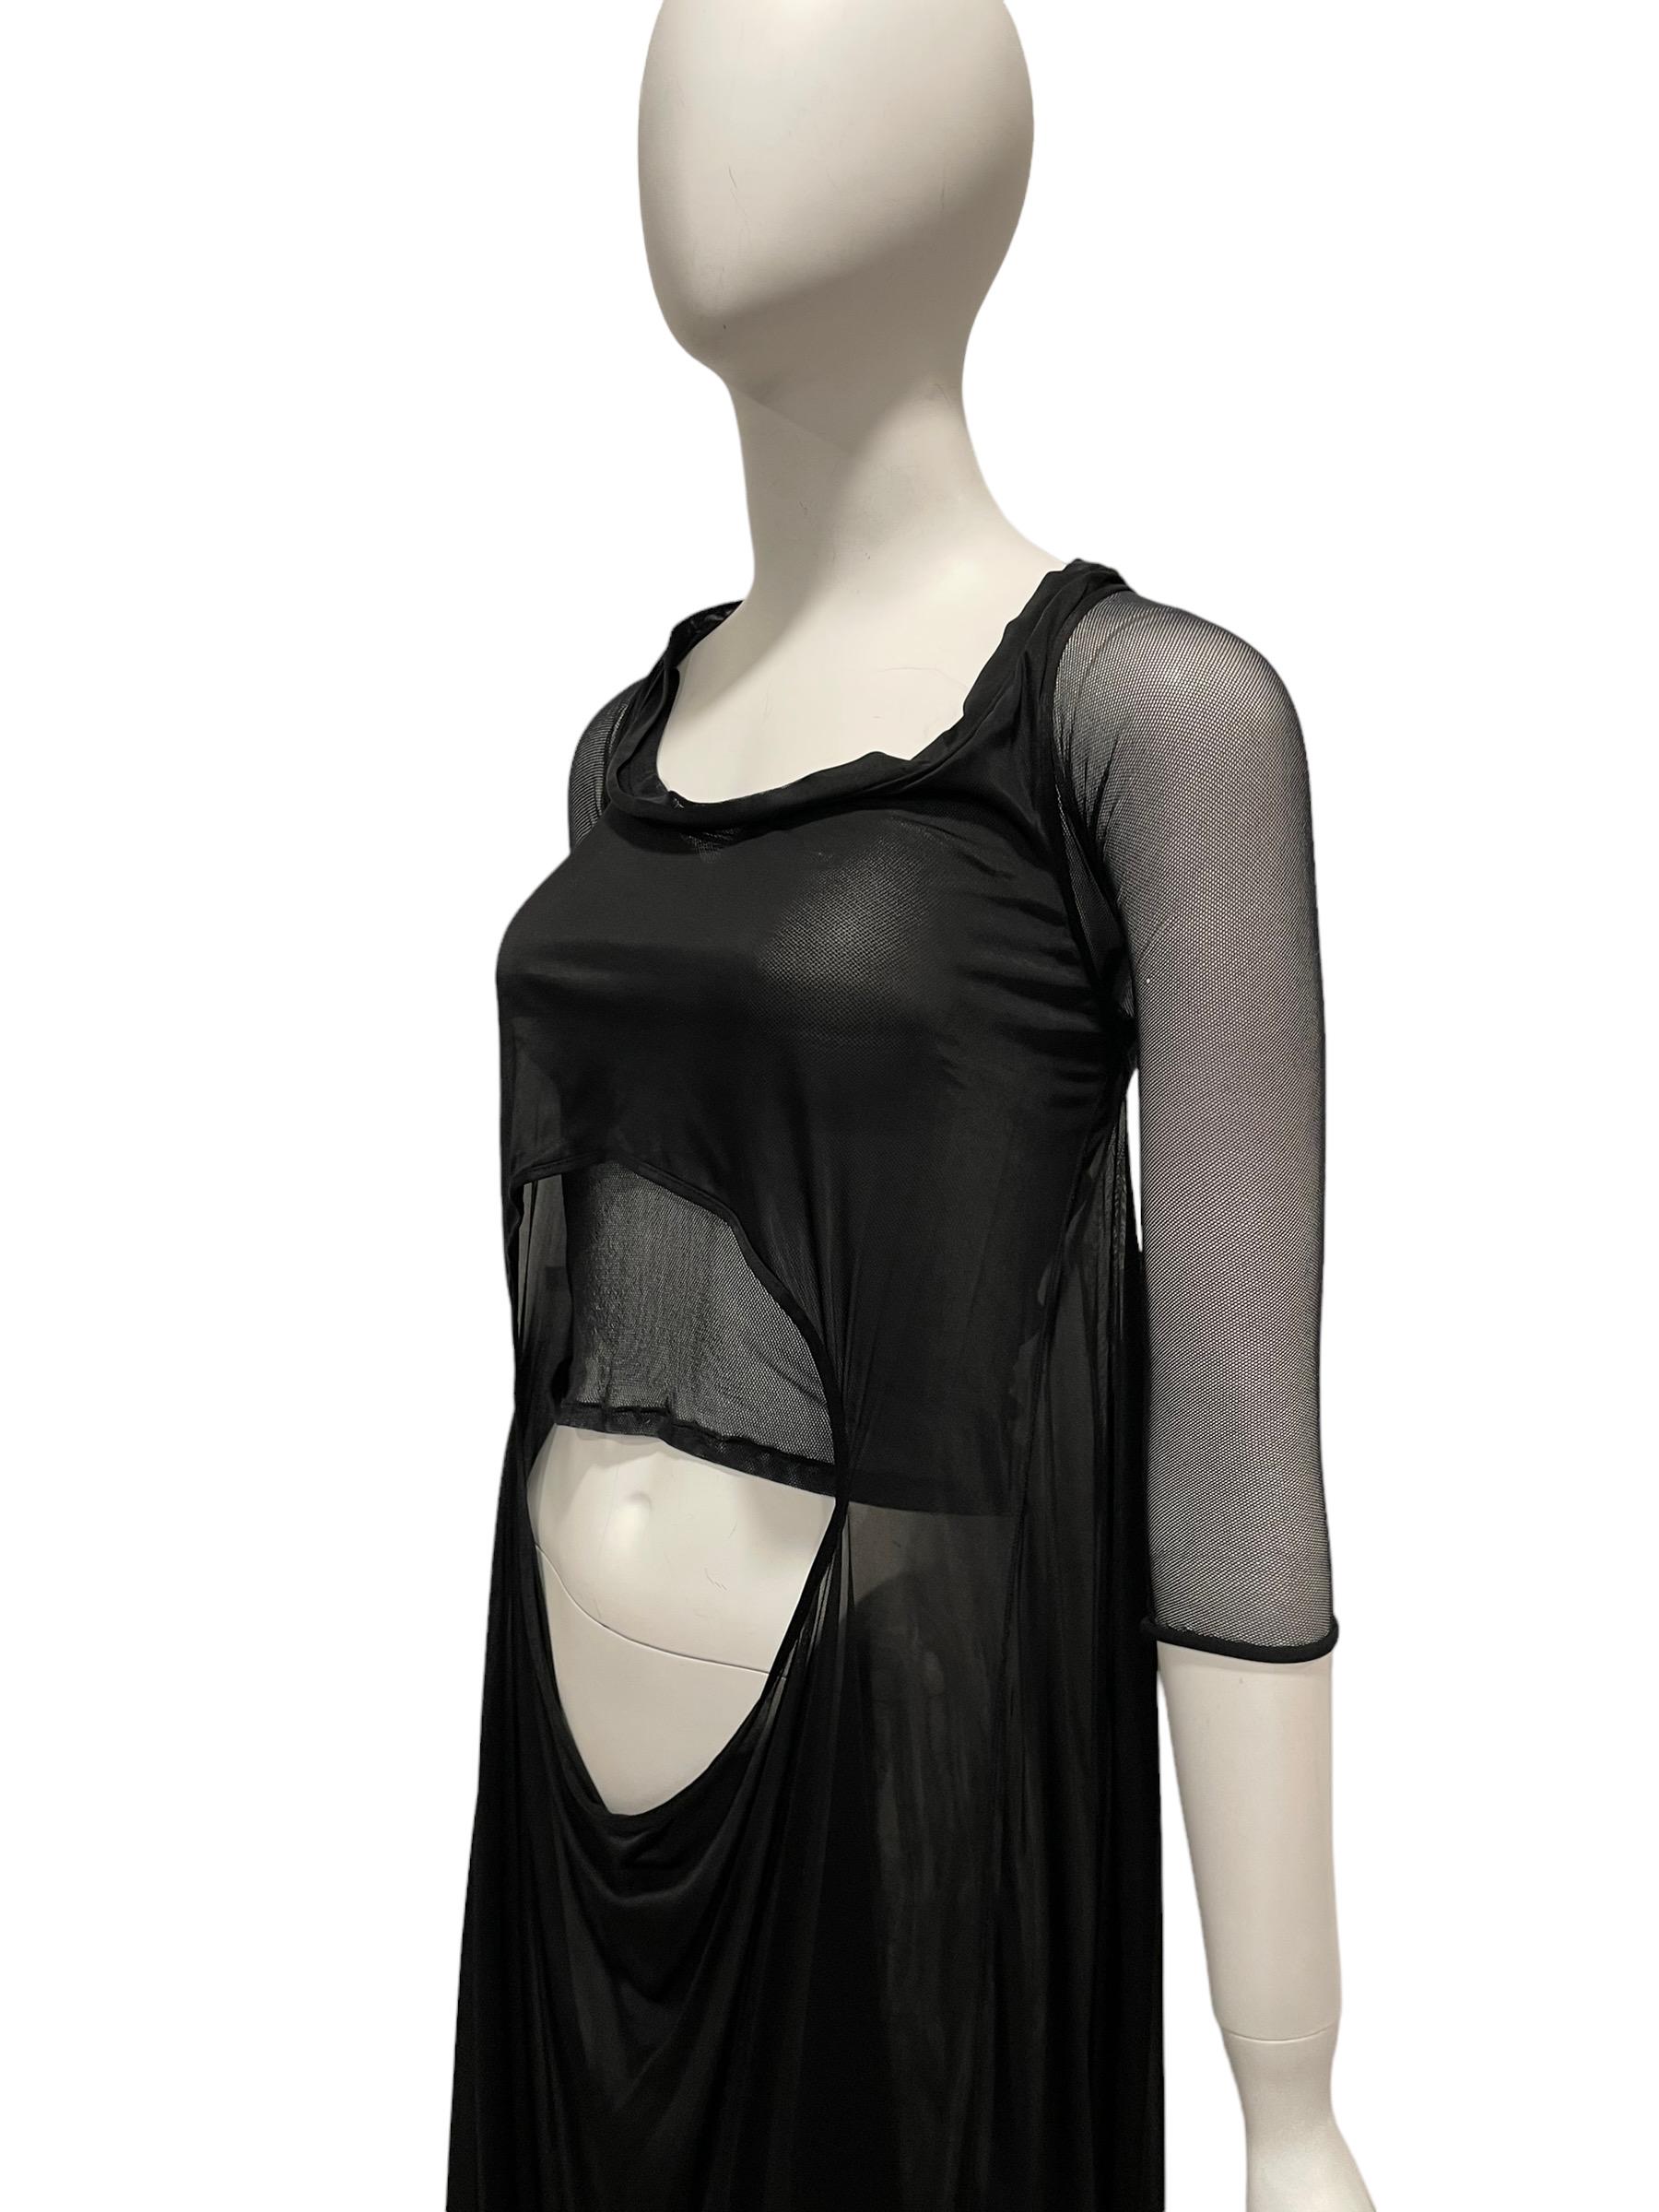 S/S 2004 Alexander McQueen Mesh Cut Out Dress In Good Condition For Sale In Austin, TX